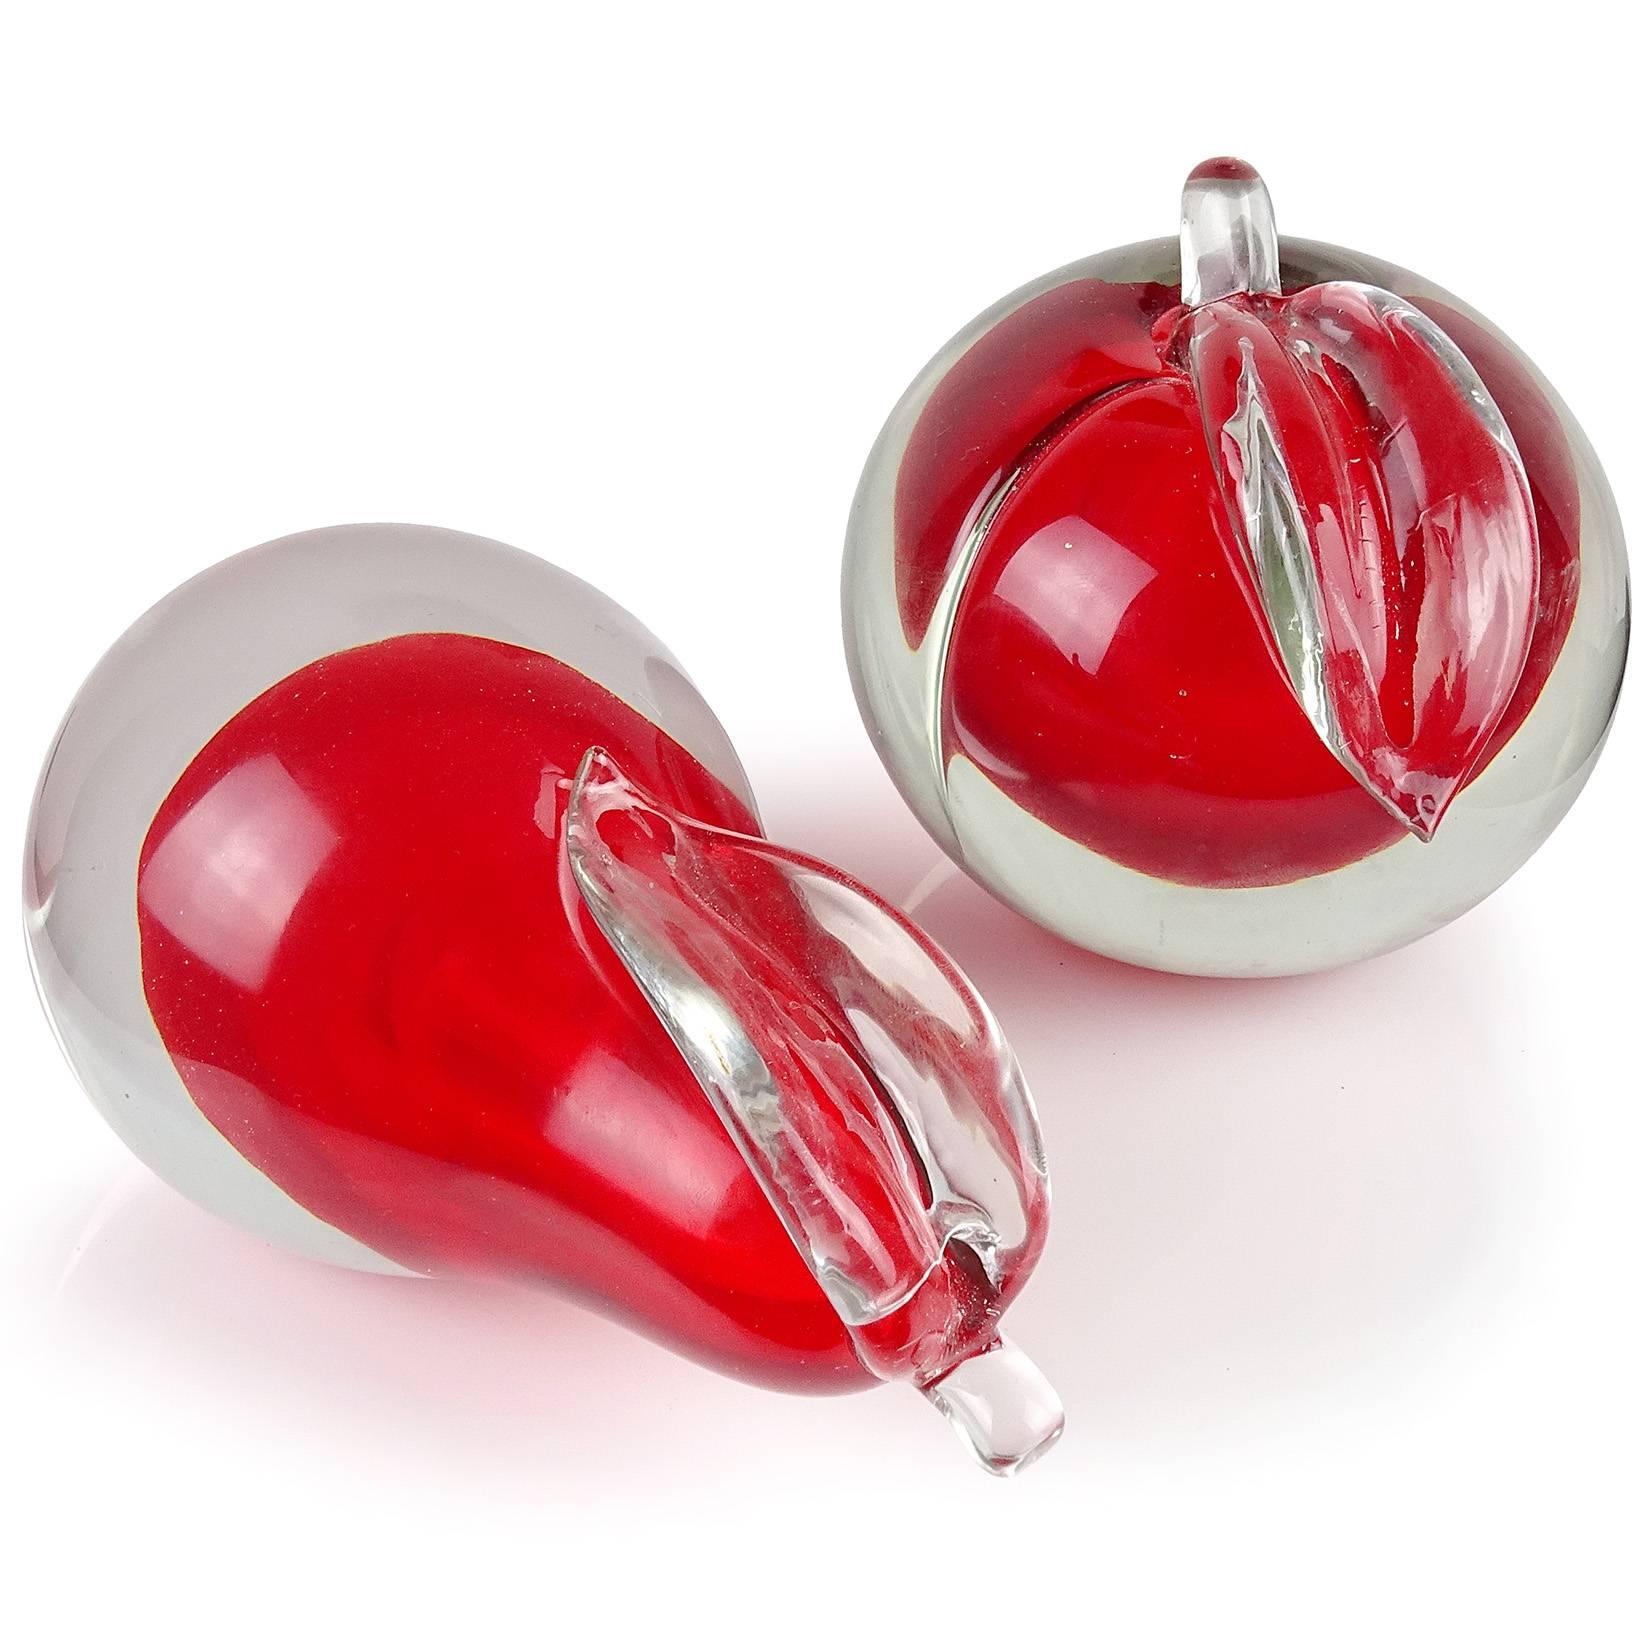 Beautiful Murano handblown Sommerso red Italian art glass pear and apple fruit bookends. Documented to designer Alfredo Barbini. The pieces have two polished ends, so they can be displayed on their sides. Pear measures 6 1/4“ tall. Great decorative